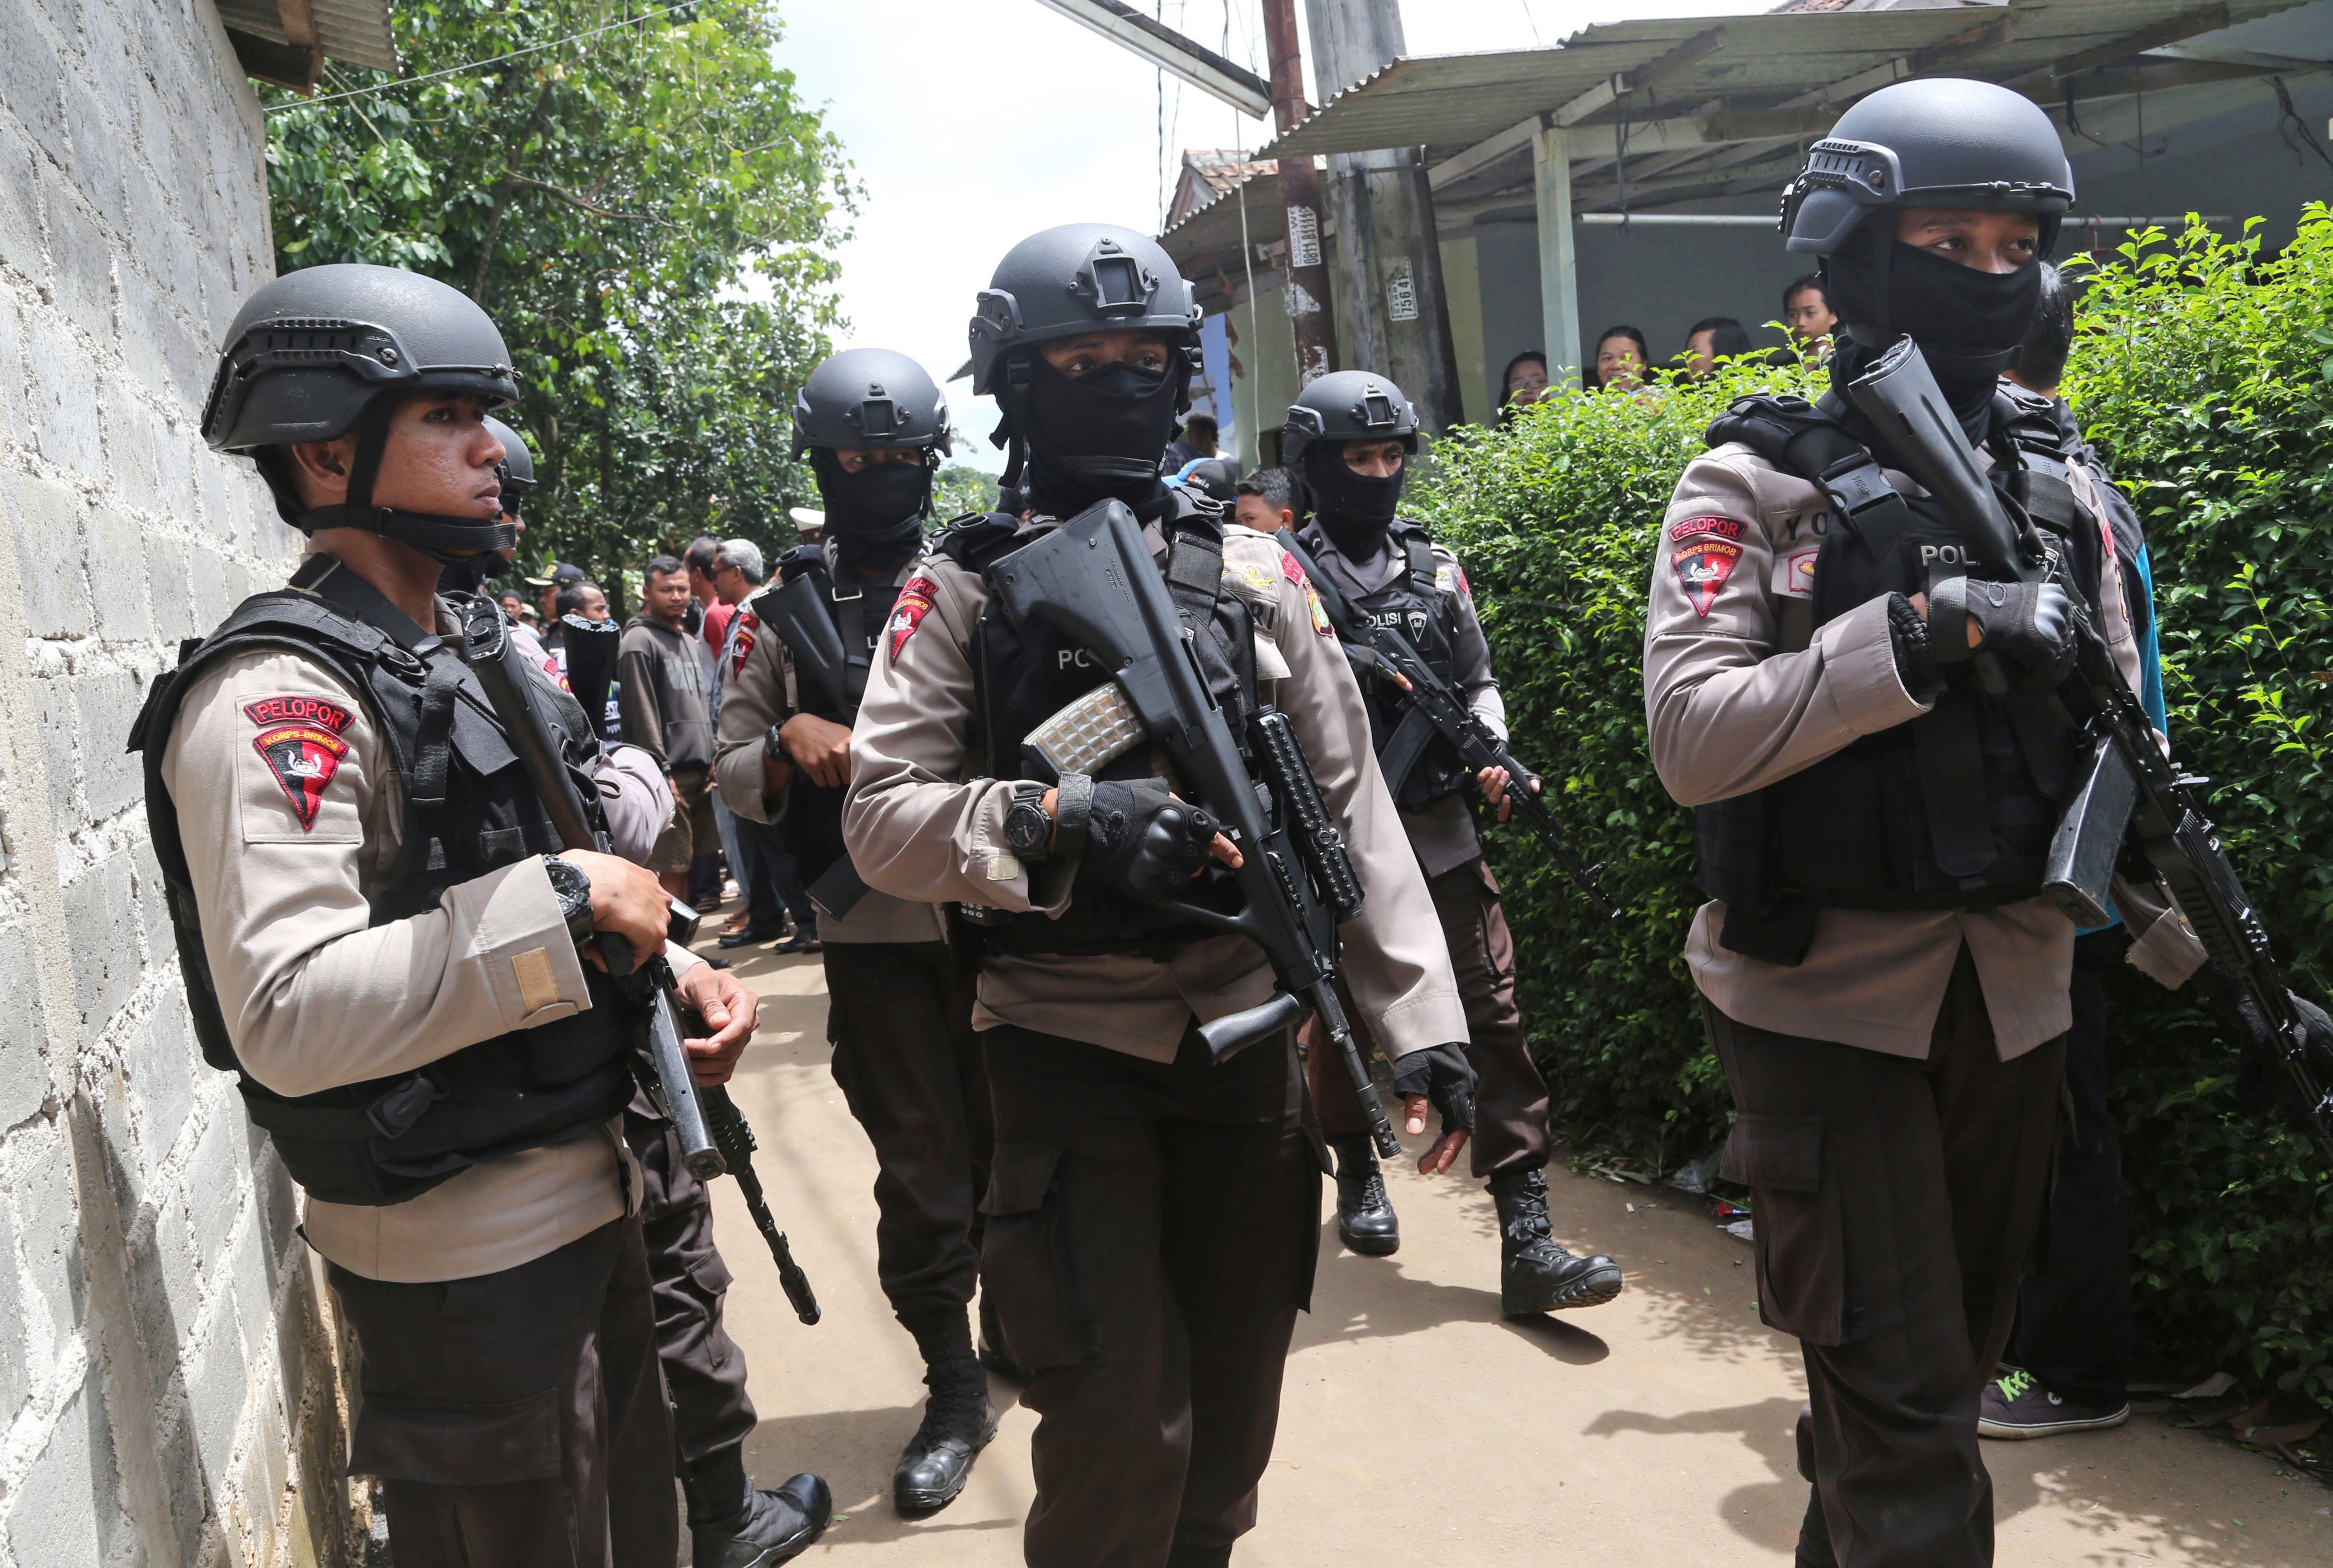 Police officers stand guard at a residential neighborhood in Tangerang, outside Jakarta, where police conducted a raid on a house used by suspected militants, on Dec. 21, 2016 (Tatan Syuflana—AP)